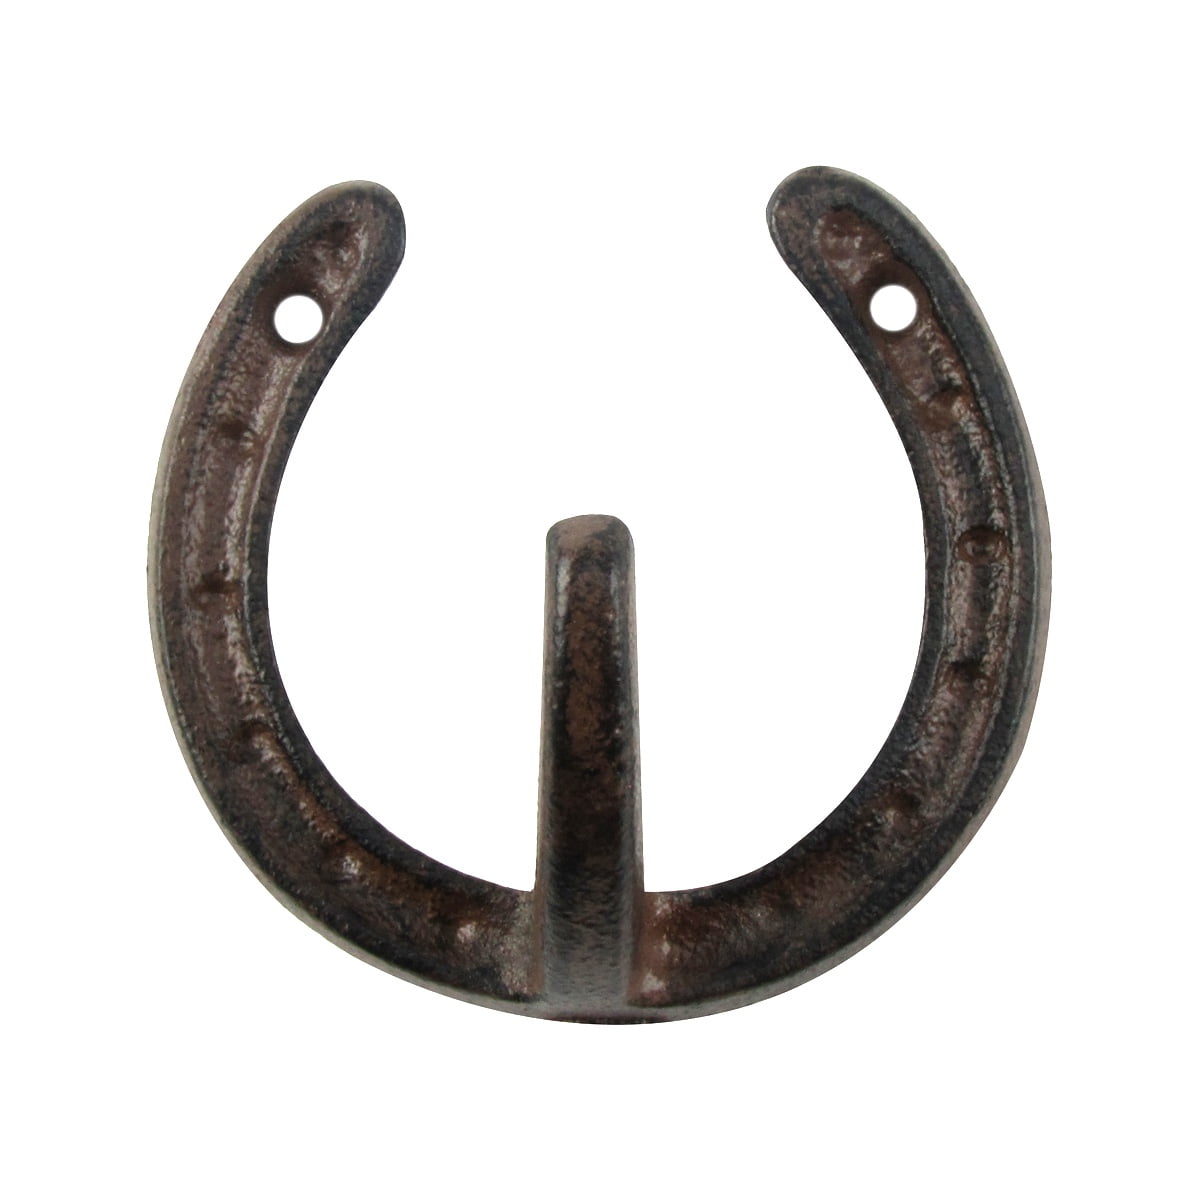 Lucky Horse Shoe Wall Hanging Rustic Horseshoe Metal On Wood Western Decor LP